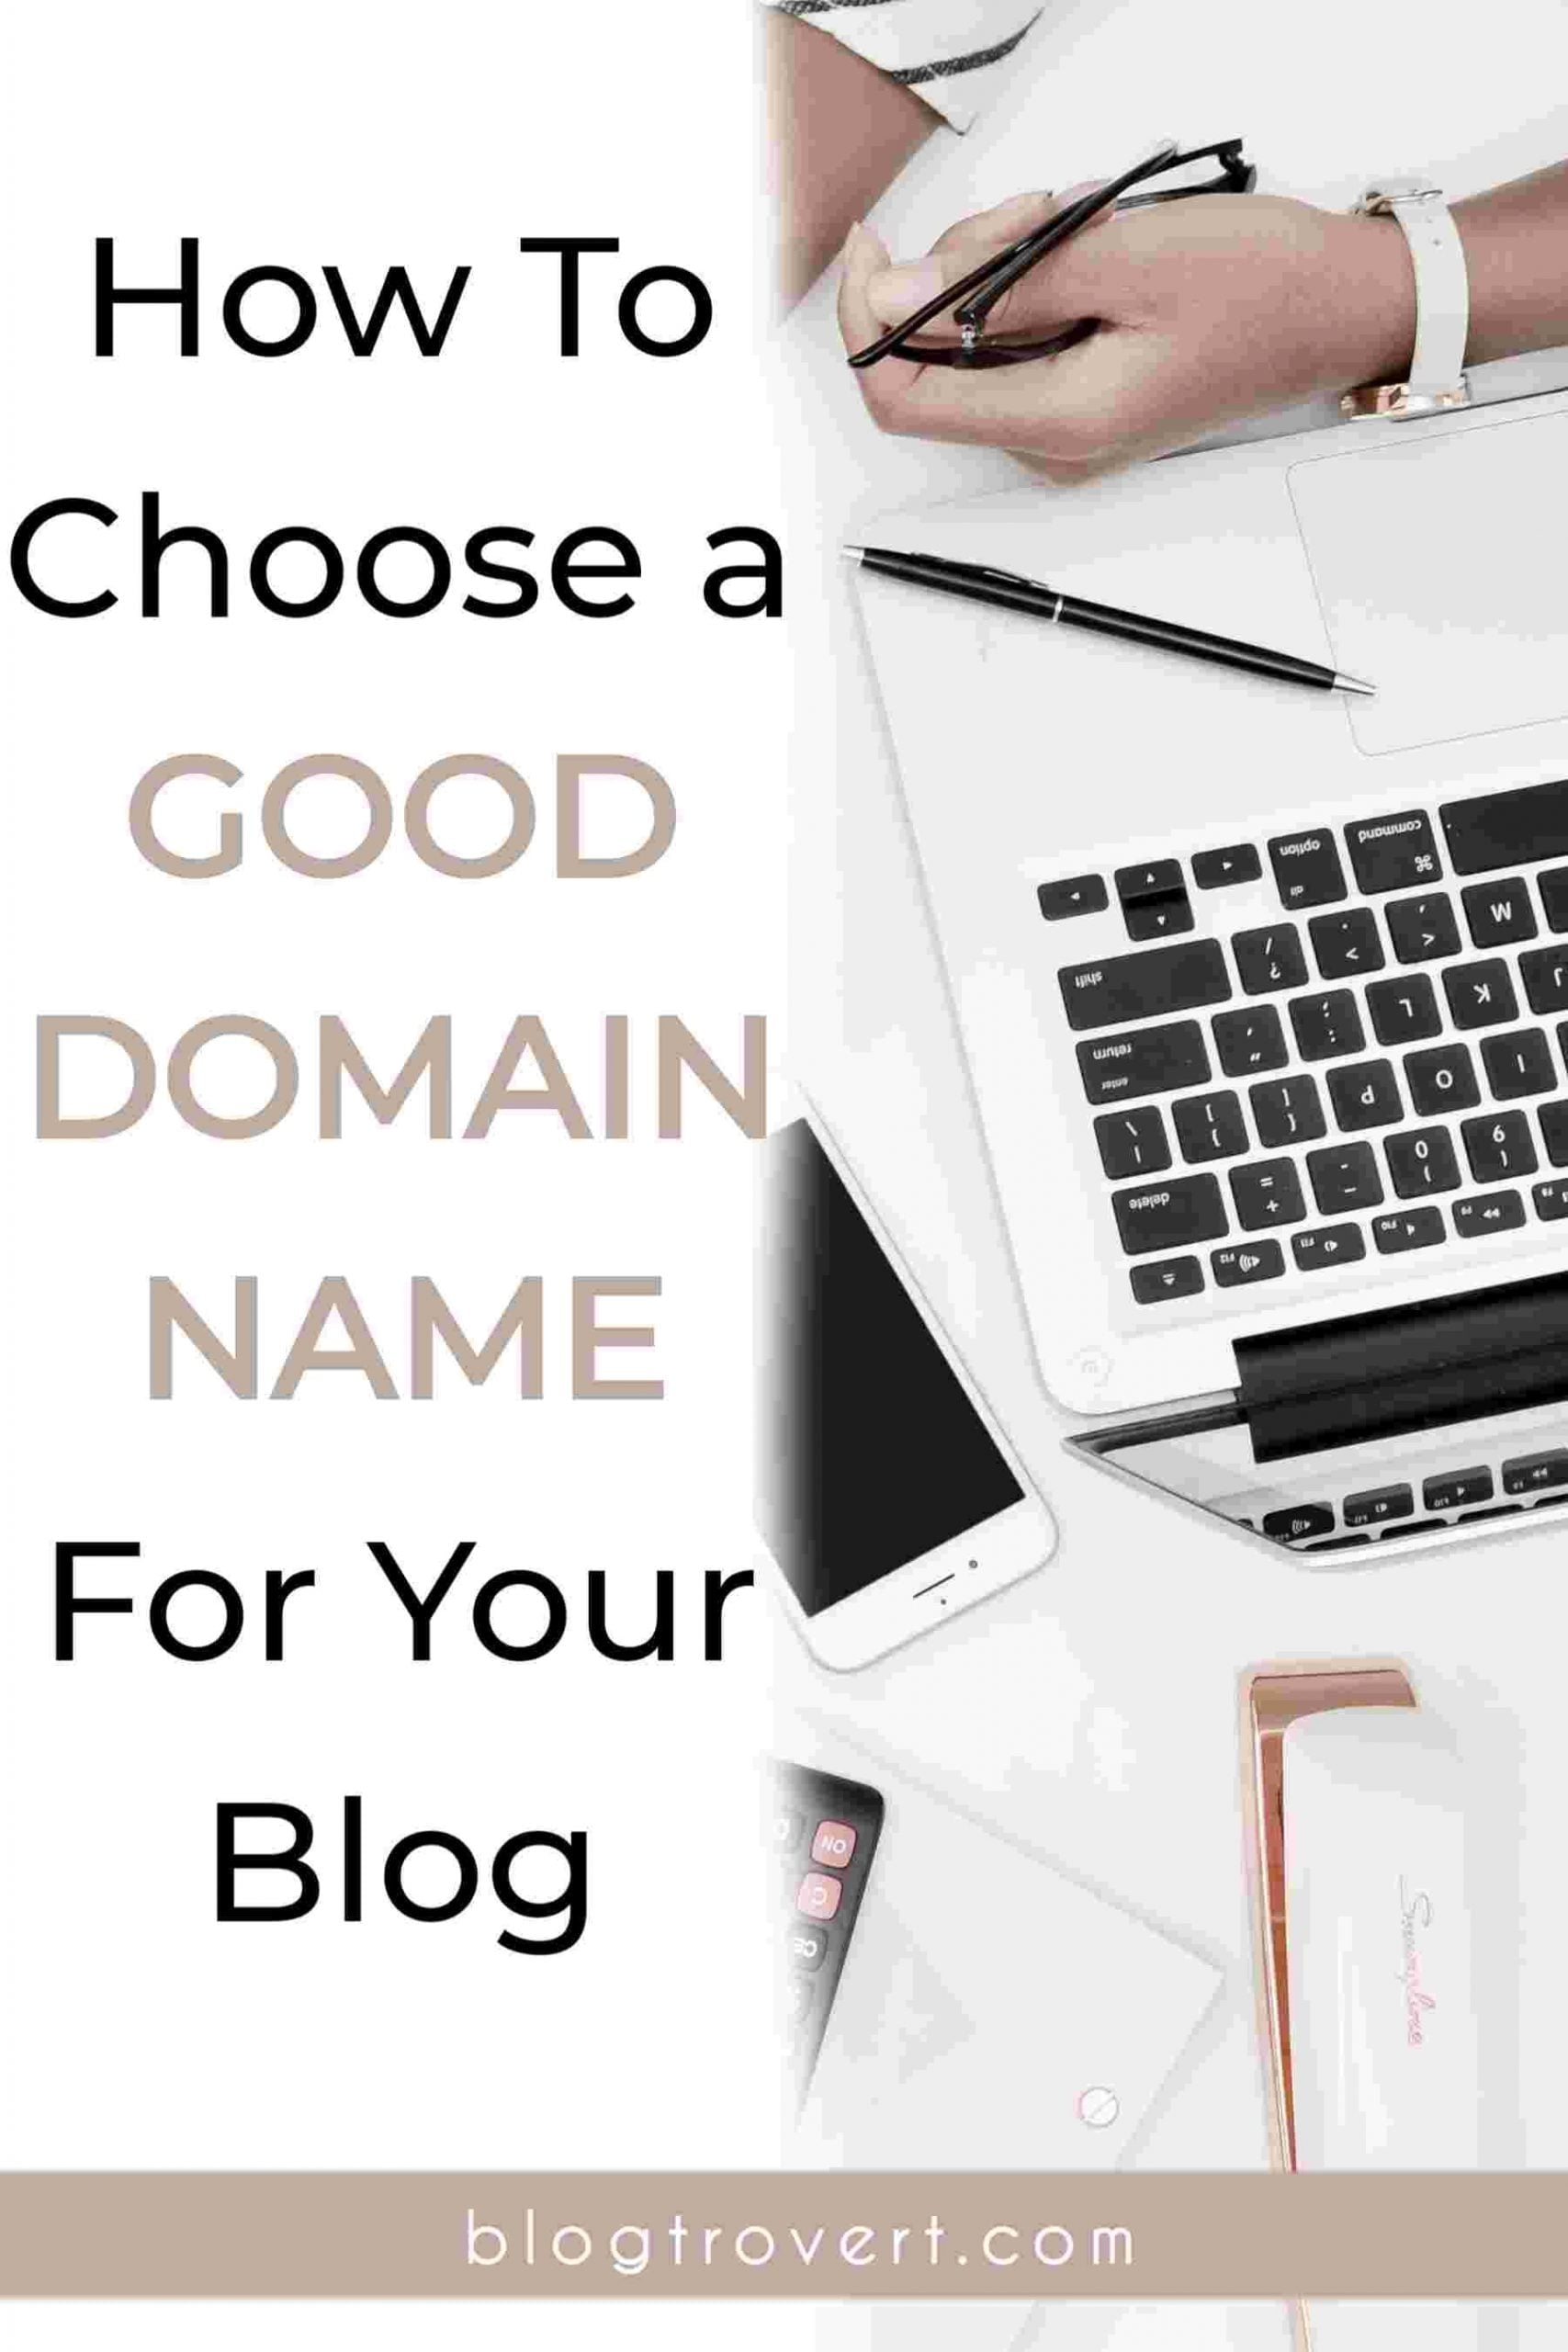 How To Choose a Good Domain Name For Your Blog; 13 Essential Tips 3